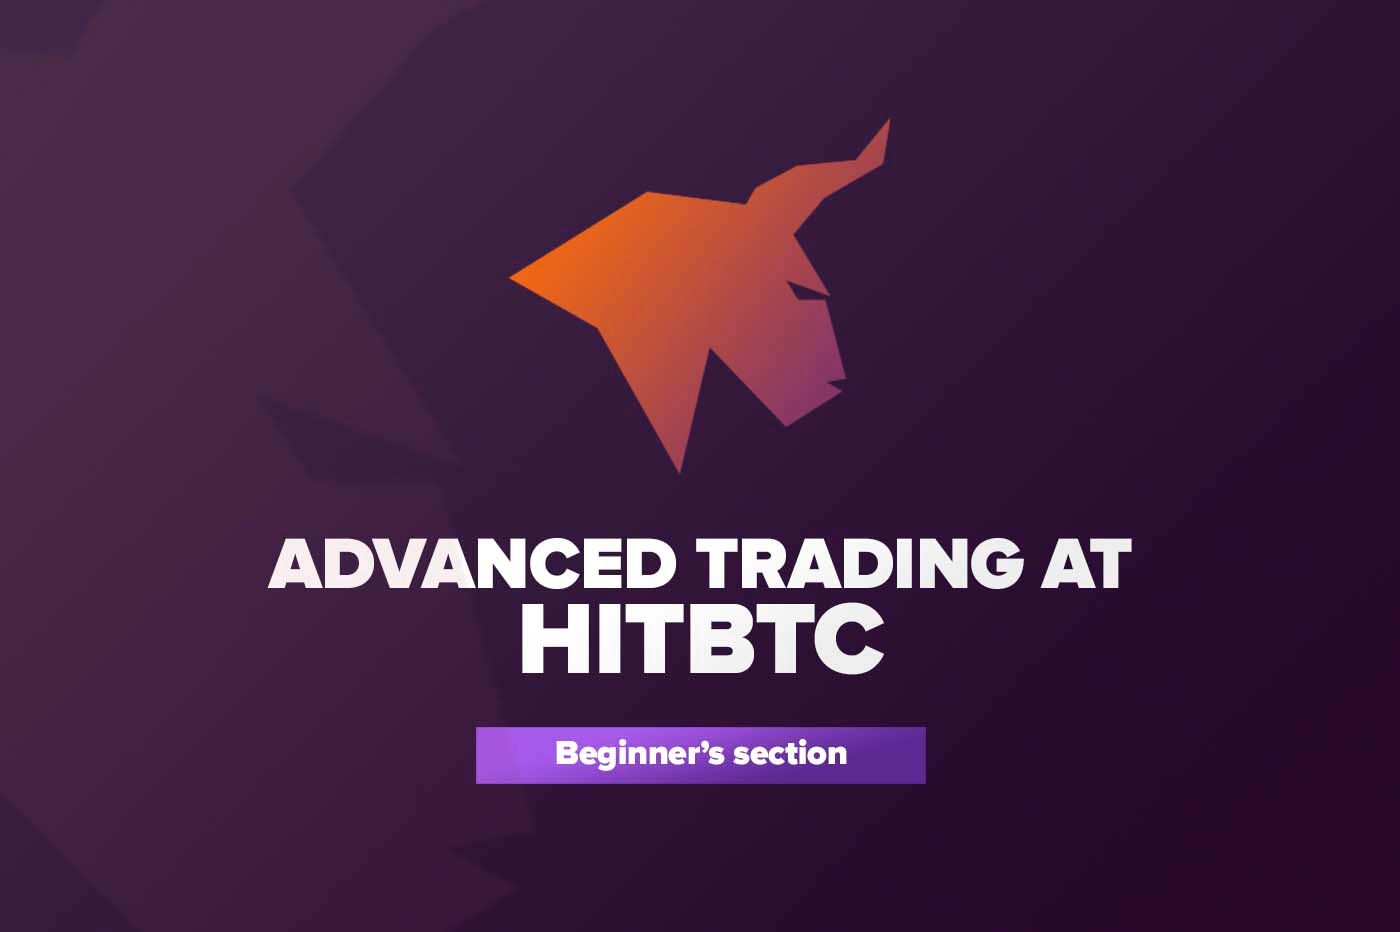 Article Advanced trading at HITBTC